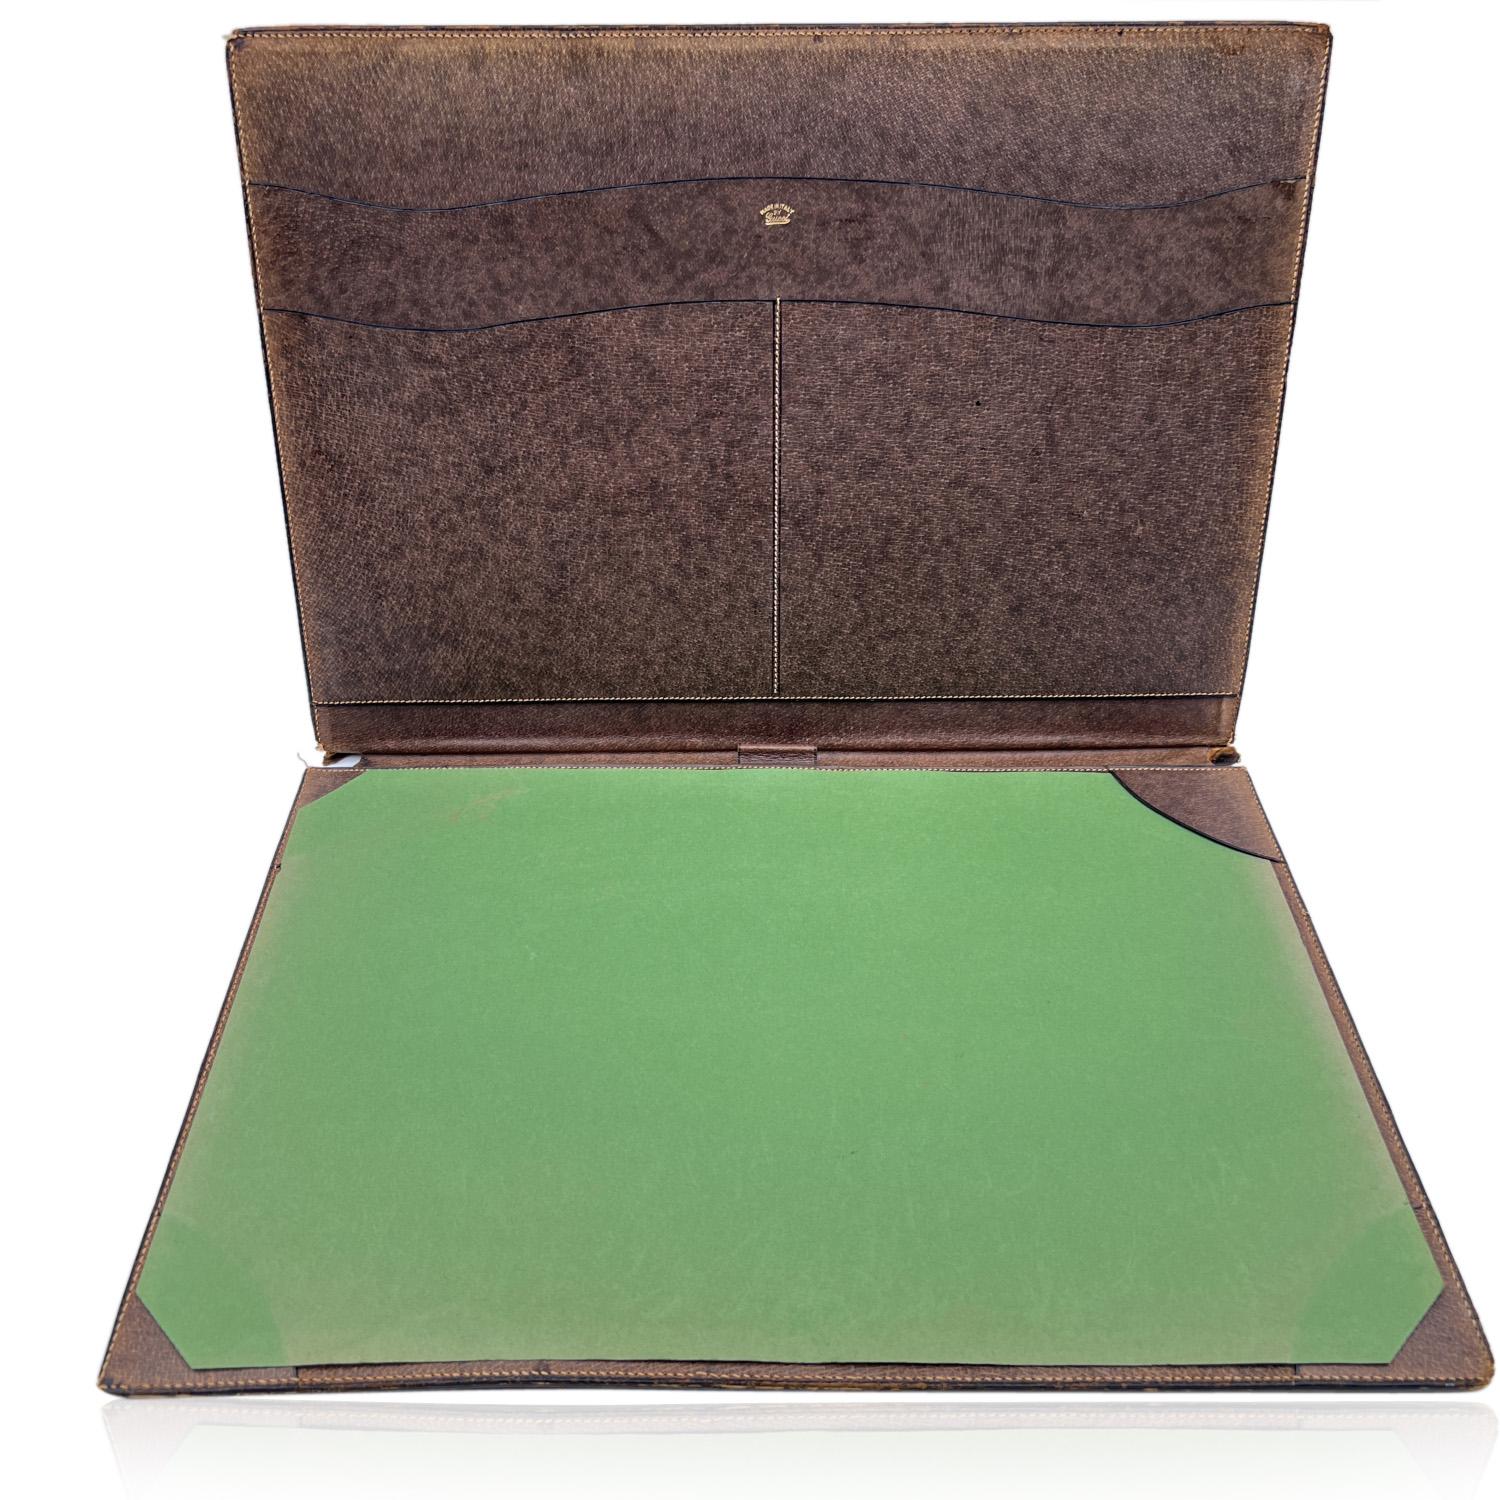 Vintage desk set by GUCCI. Crafted in brown leather and gold metal. The set includes a blotter, a pen holder and a letter opener with an inset magnifying glass. Each piece is marked with Gucci signature.

MEASUREMENTS
- Blotter: 18.5 x 13.5 inches -